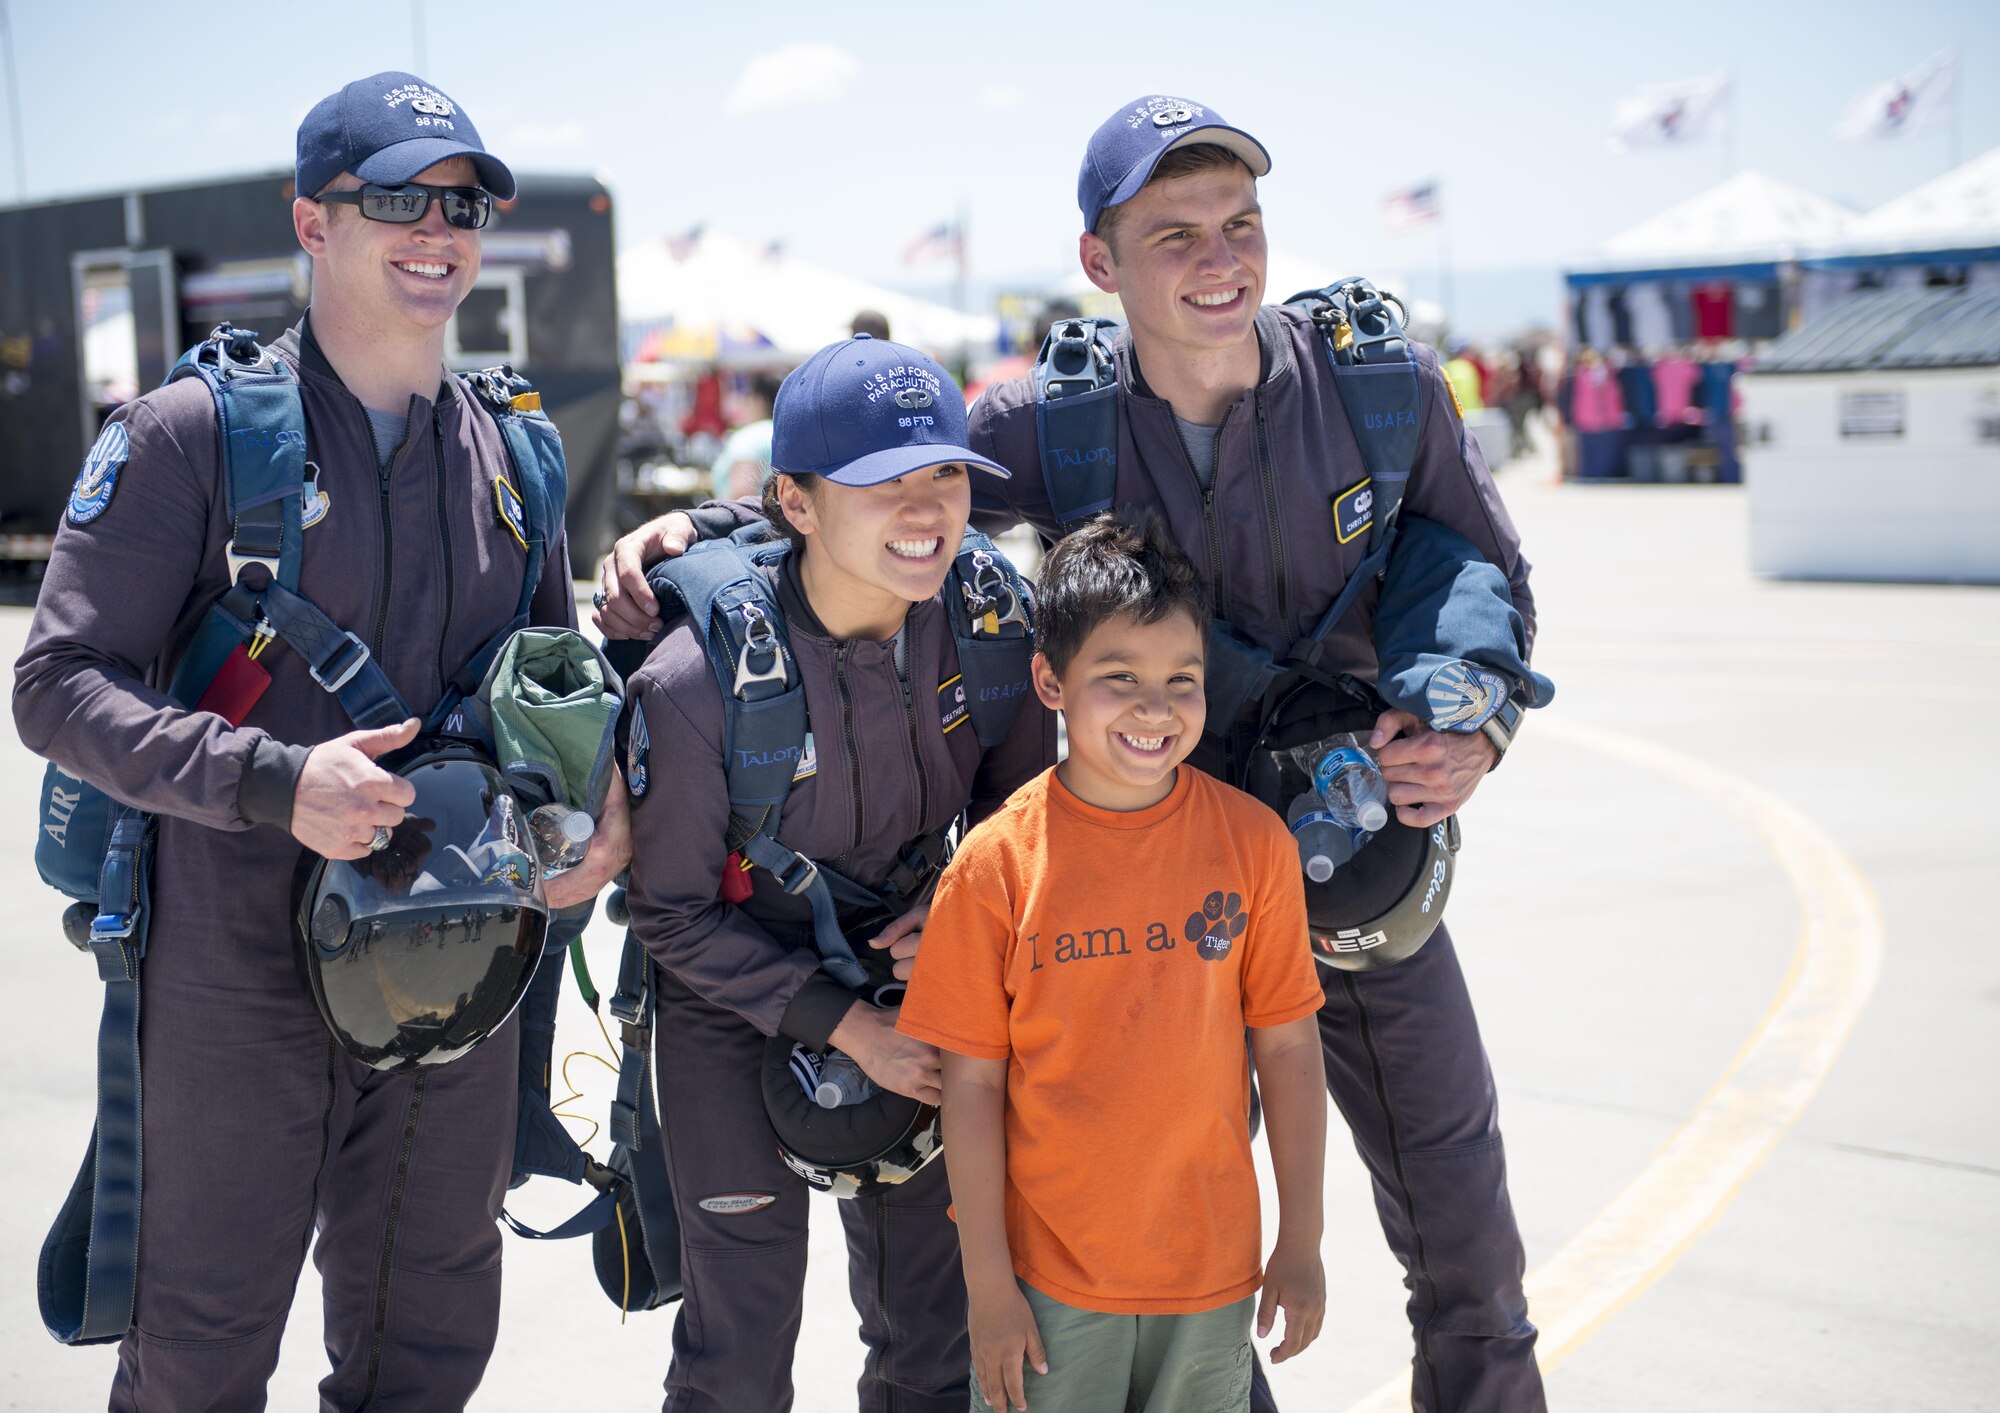 Cadets from the Air Force’s Wings of Blue pose for a photo with a visitor during the Kirtland Air Force Base Open House on June 5. Wings of Blue cadets performed several jumps during the open house, demonstrating their talent and presenting the flag for the national anthem. (U.S. Air Force photo by Airman 1st Class Randahl J. Jenson) 